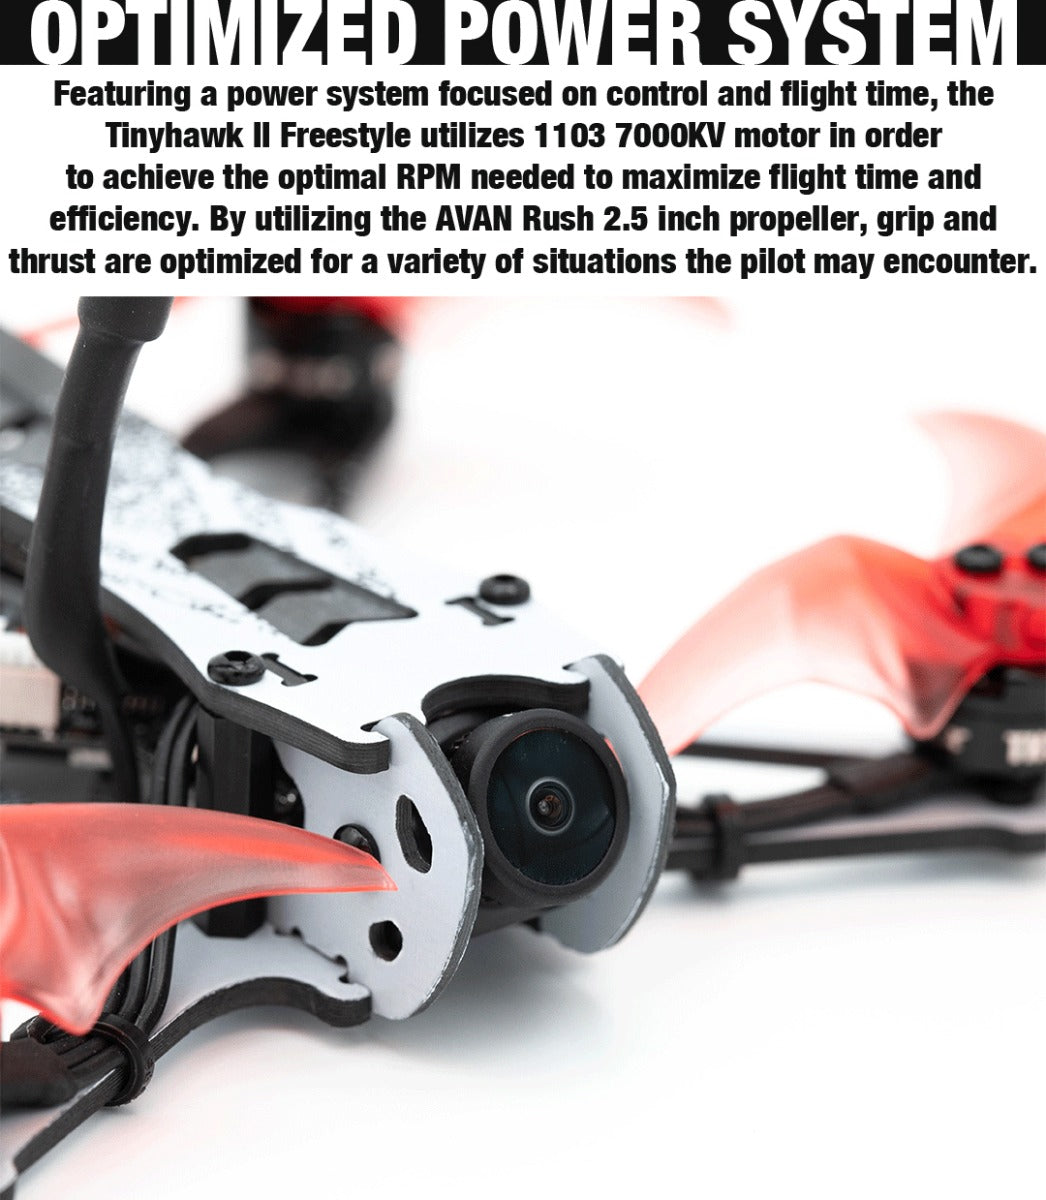 Ready-To-Fly Drones